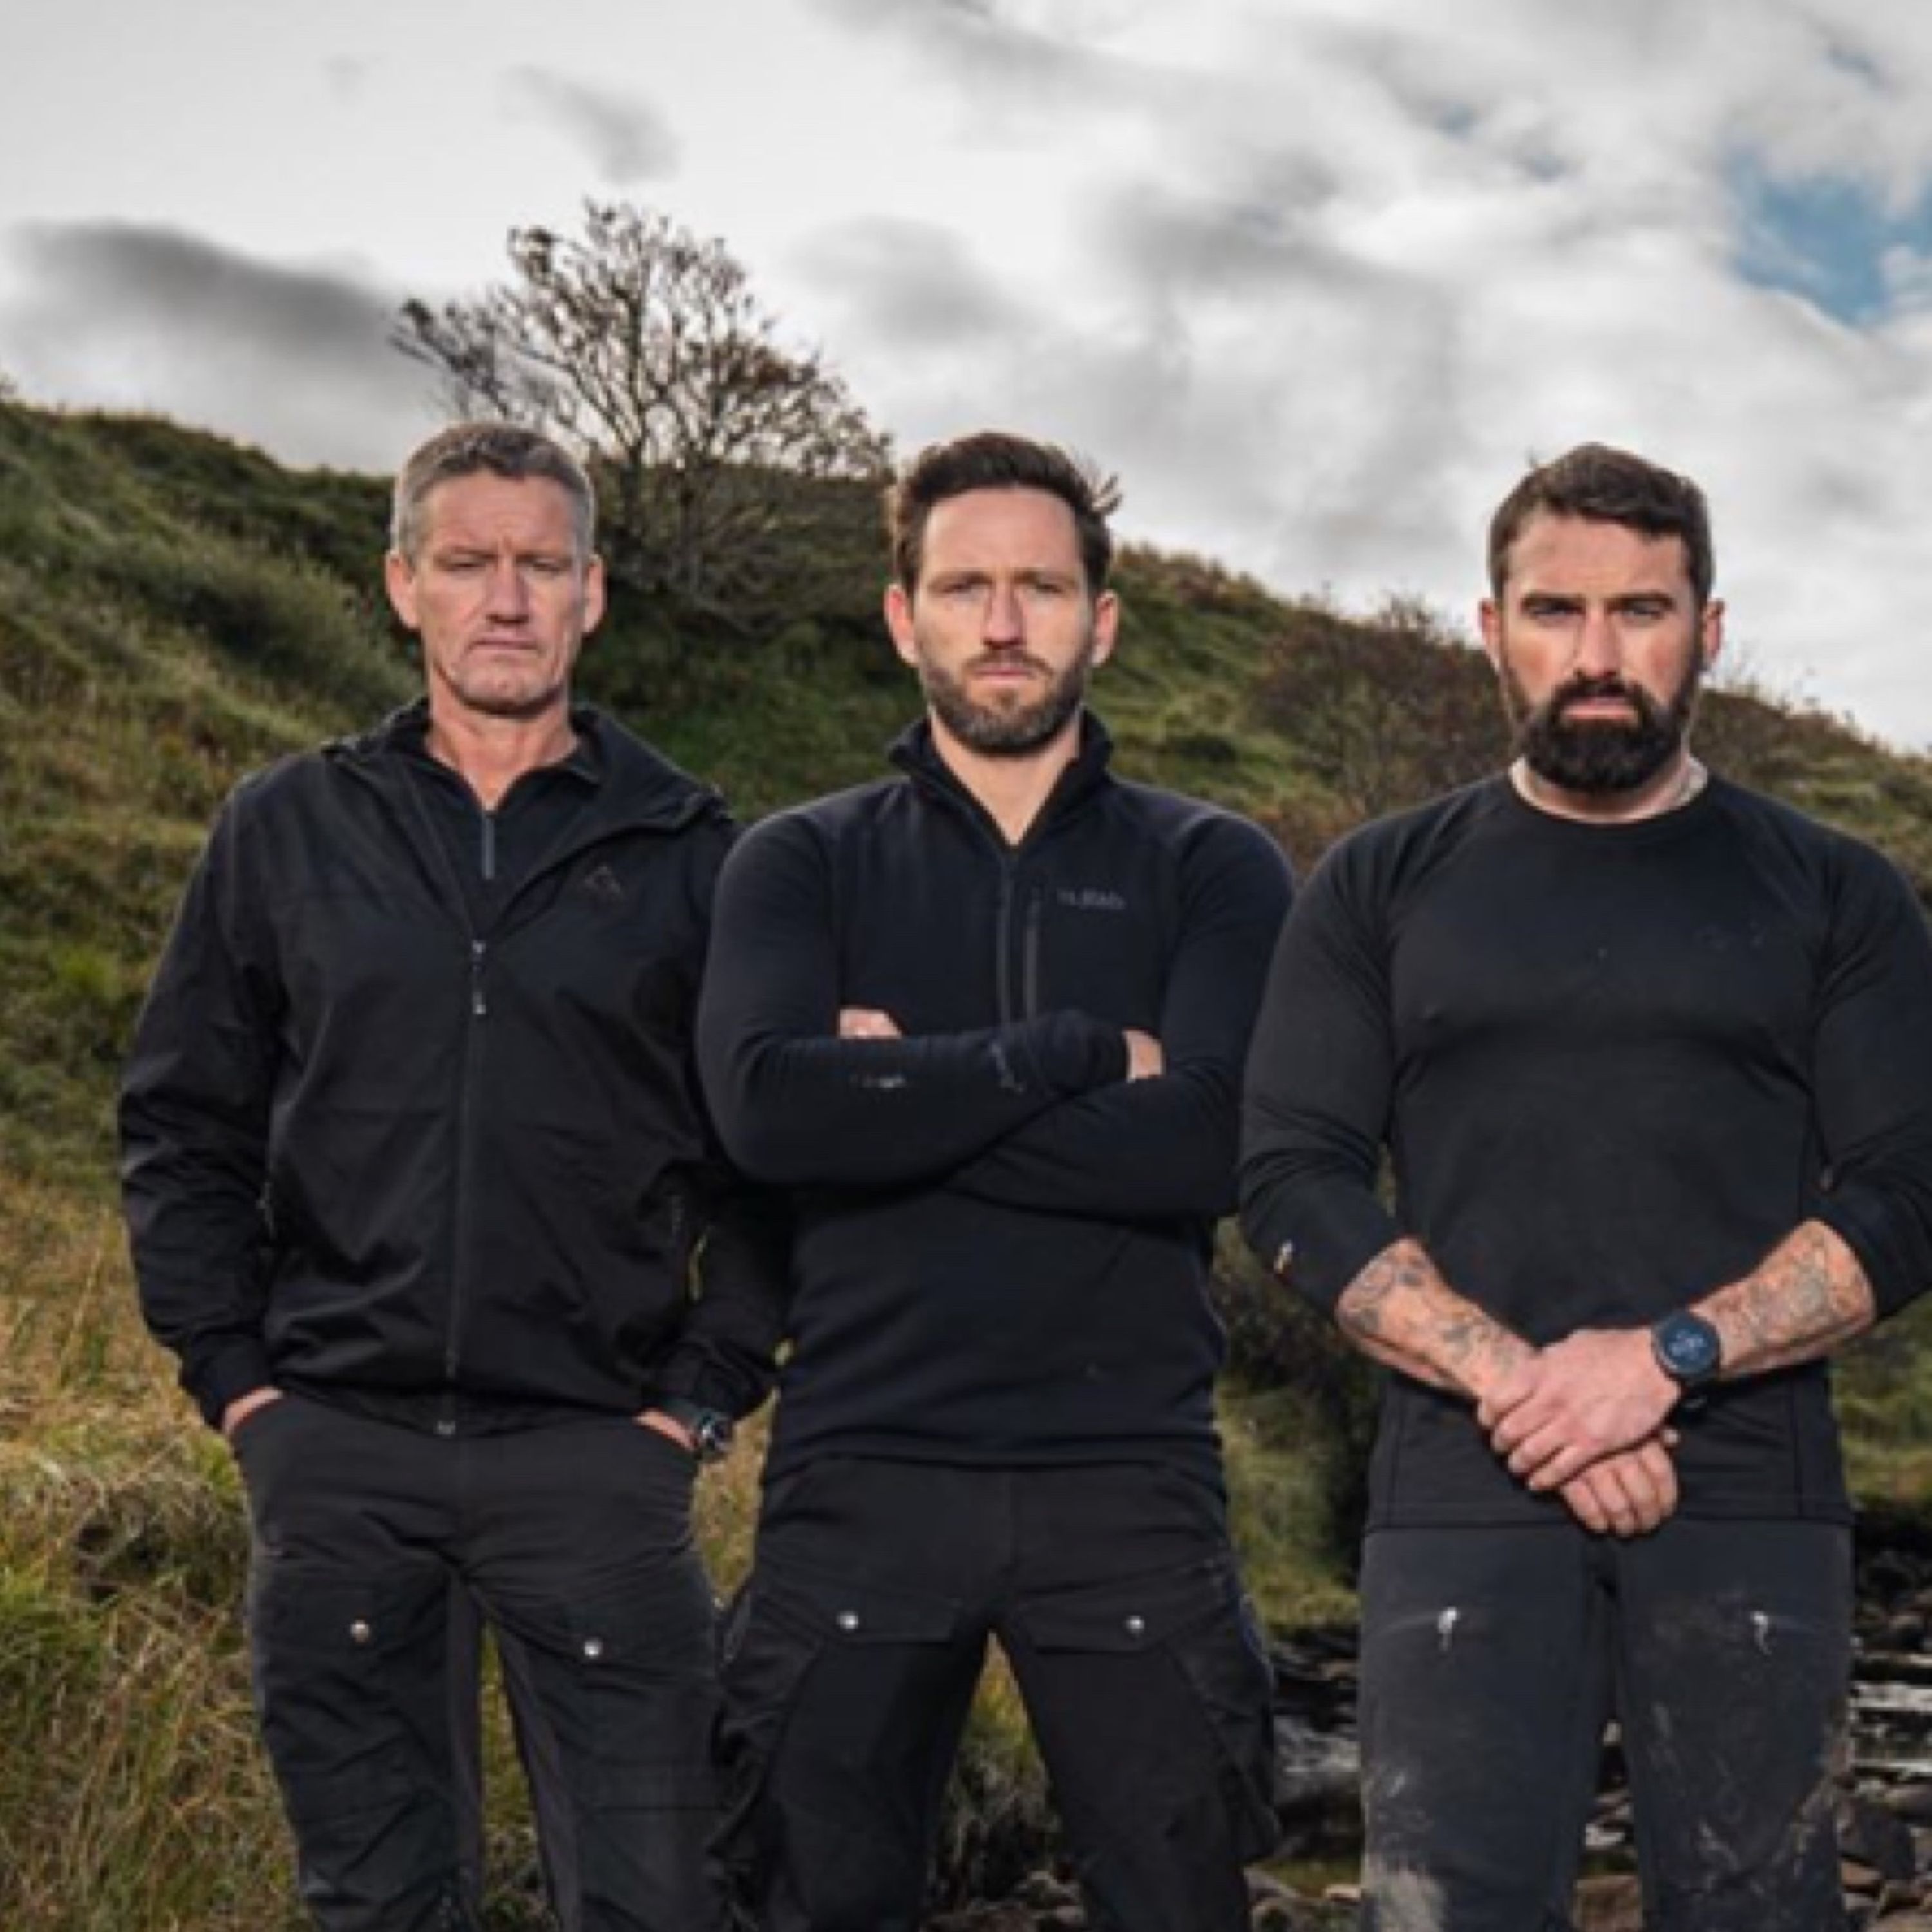 Bitesize: Mark Billingham - From SAS to personal bodyguard and ’Who Dares Wins’